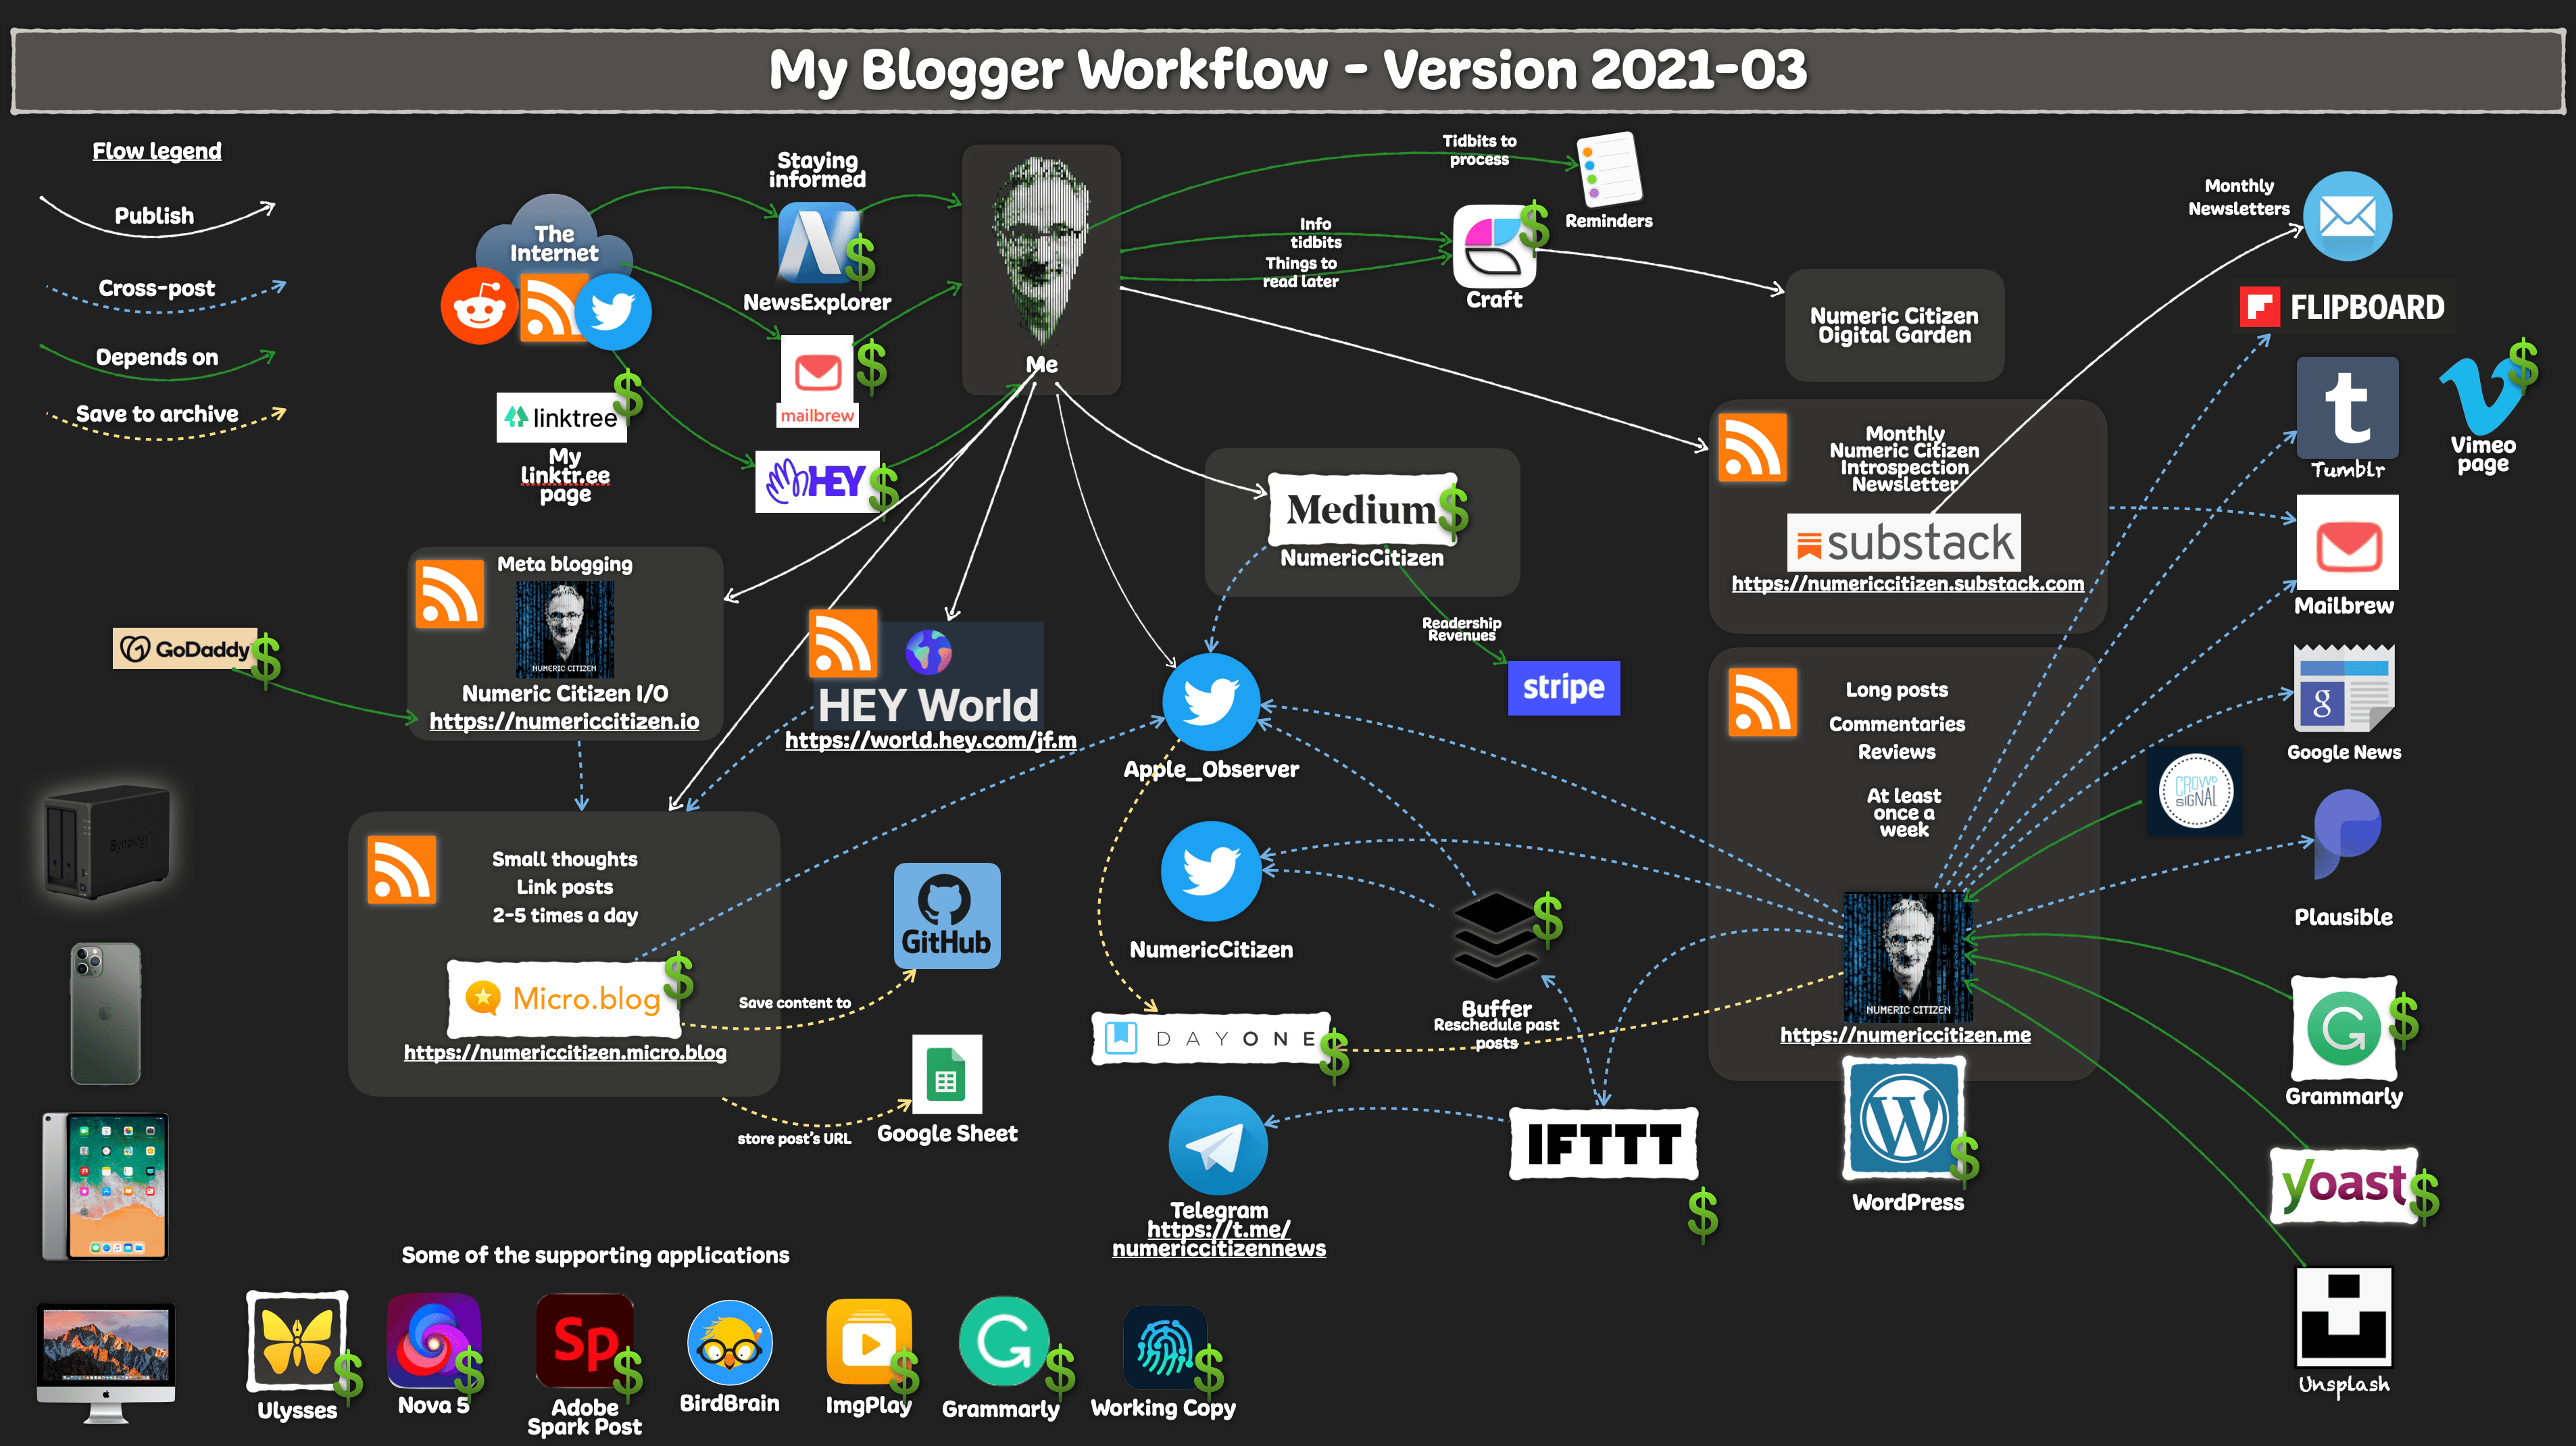 My blogger workflow as of 2021-03.